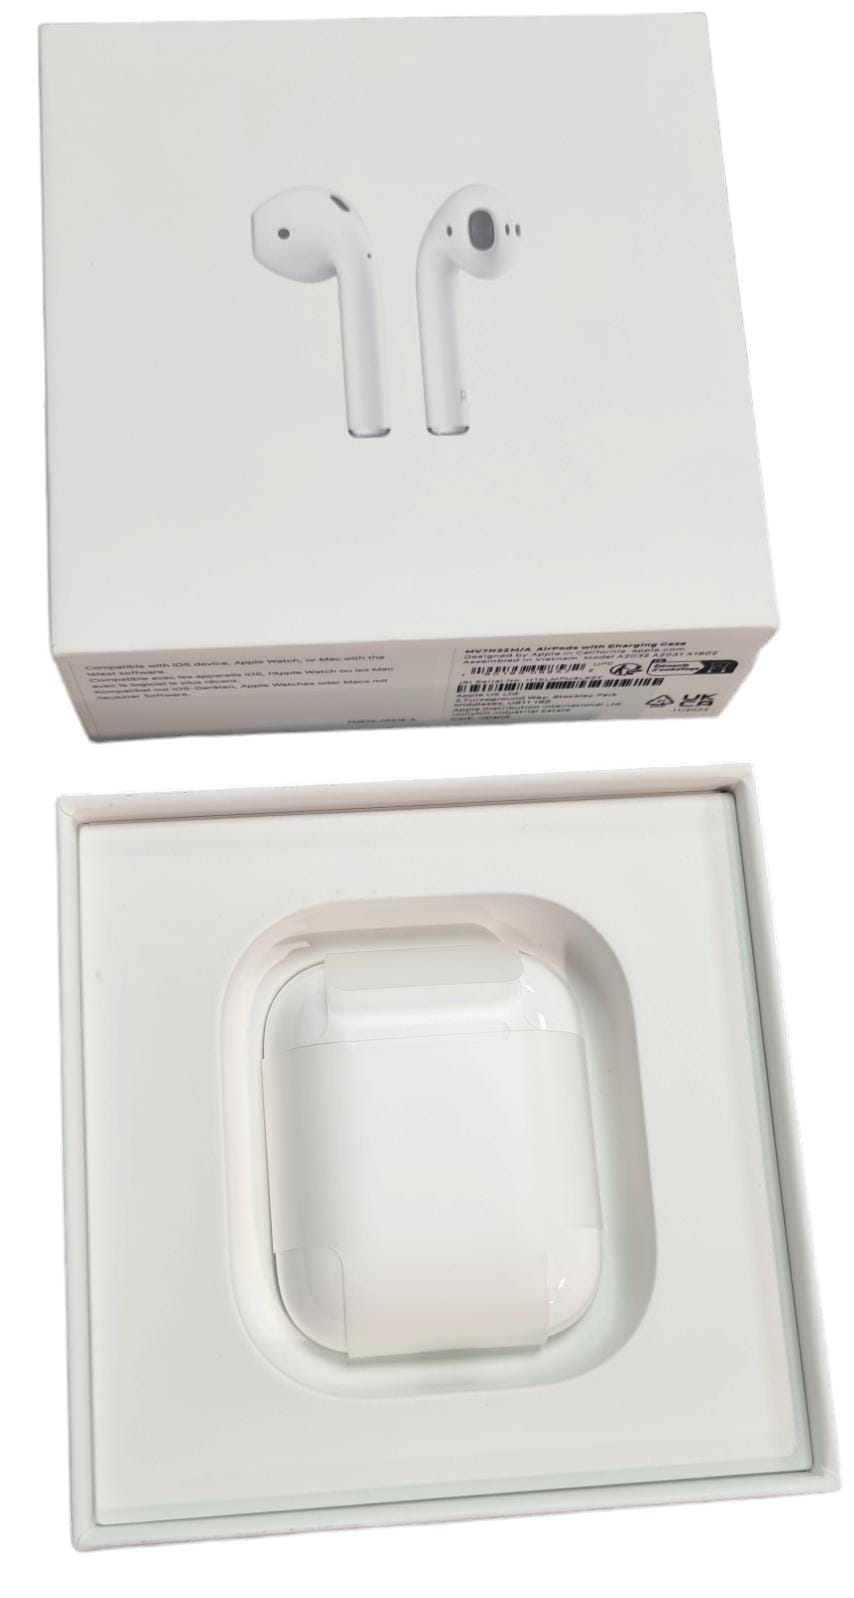 Apple Airpods 2nd Gen - Box and charger